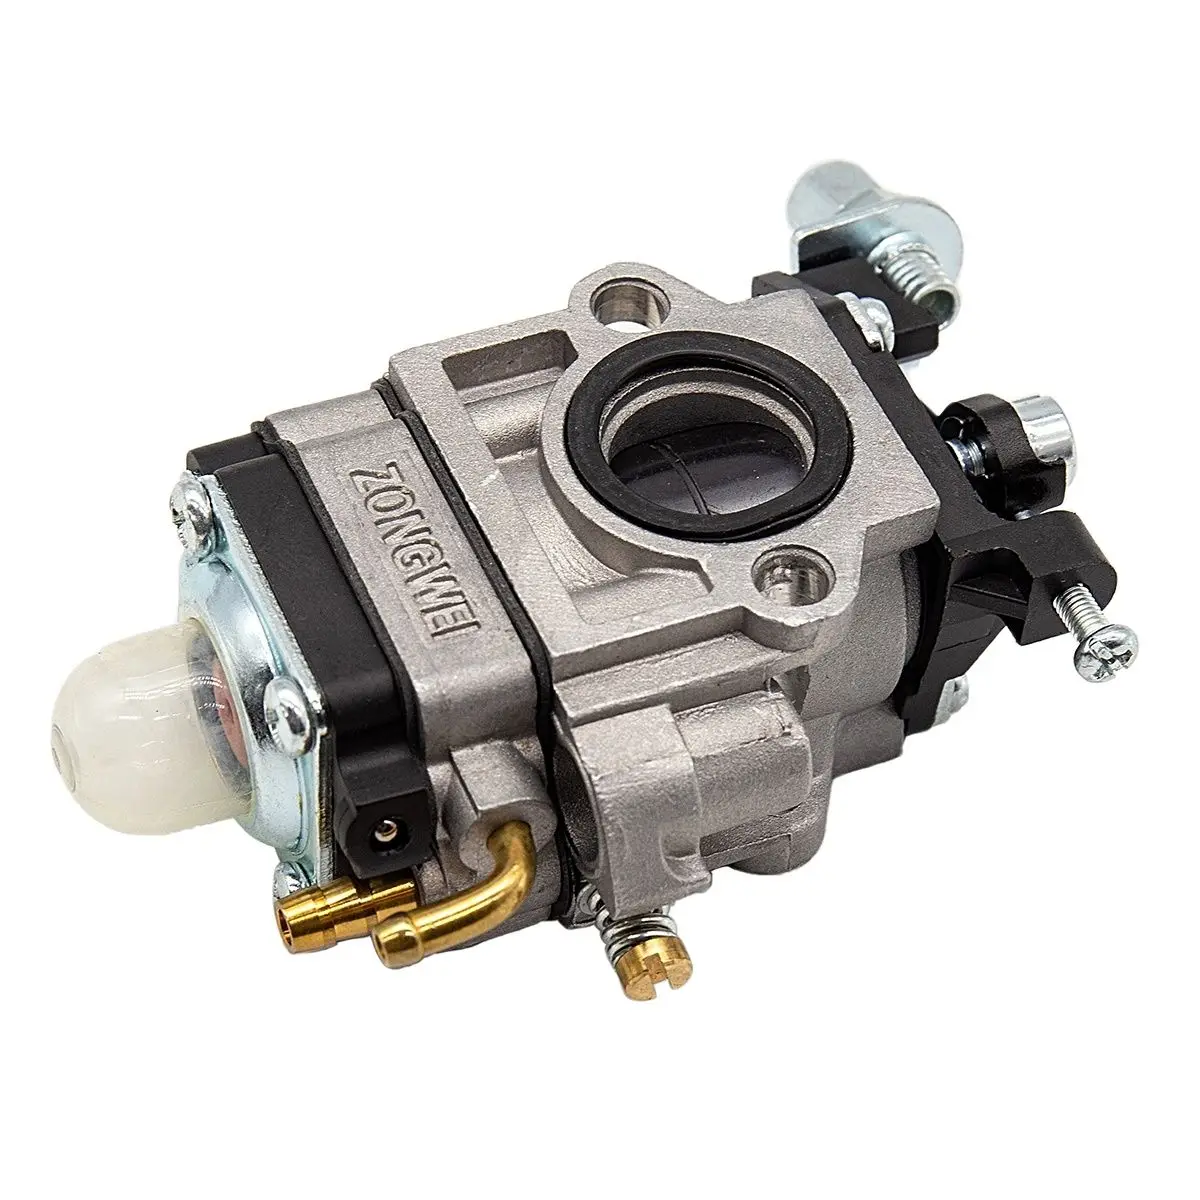 

Replacement New Carburetor for 43cc 52cc Petrol Grass Cutter Engine 40-5 44-5 40F-5 44F-5